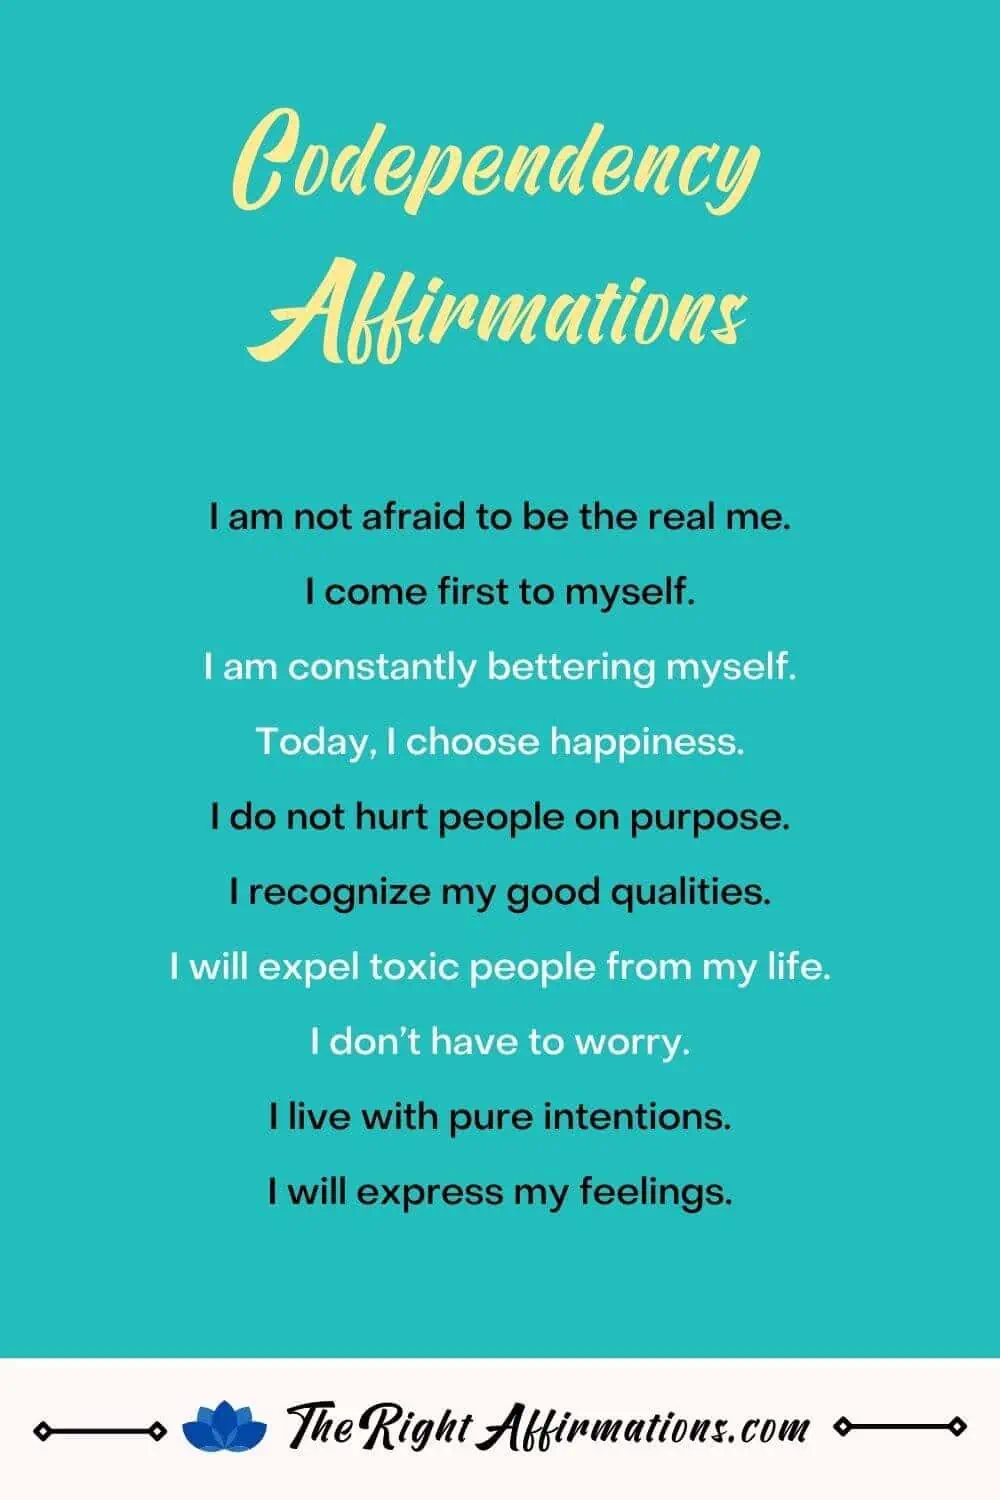 codependency affirmations pinterest